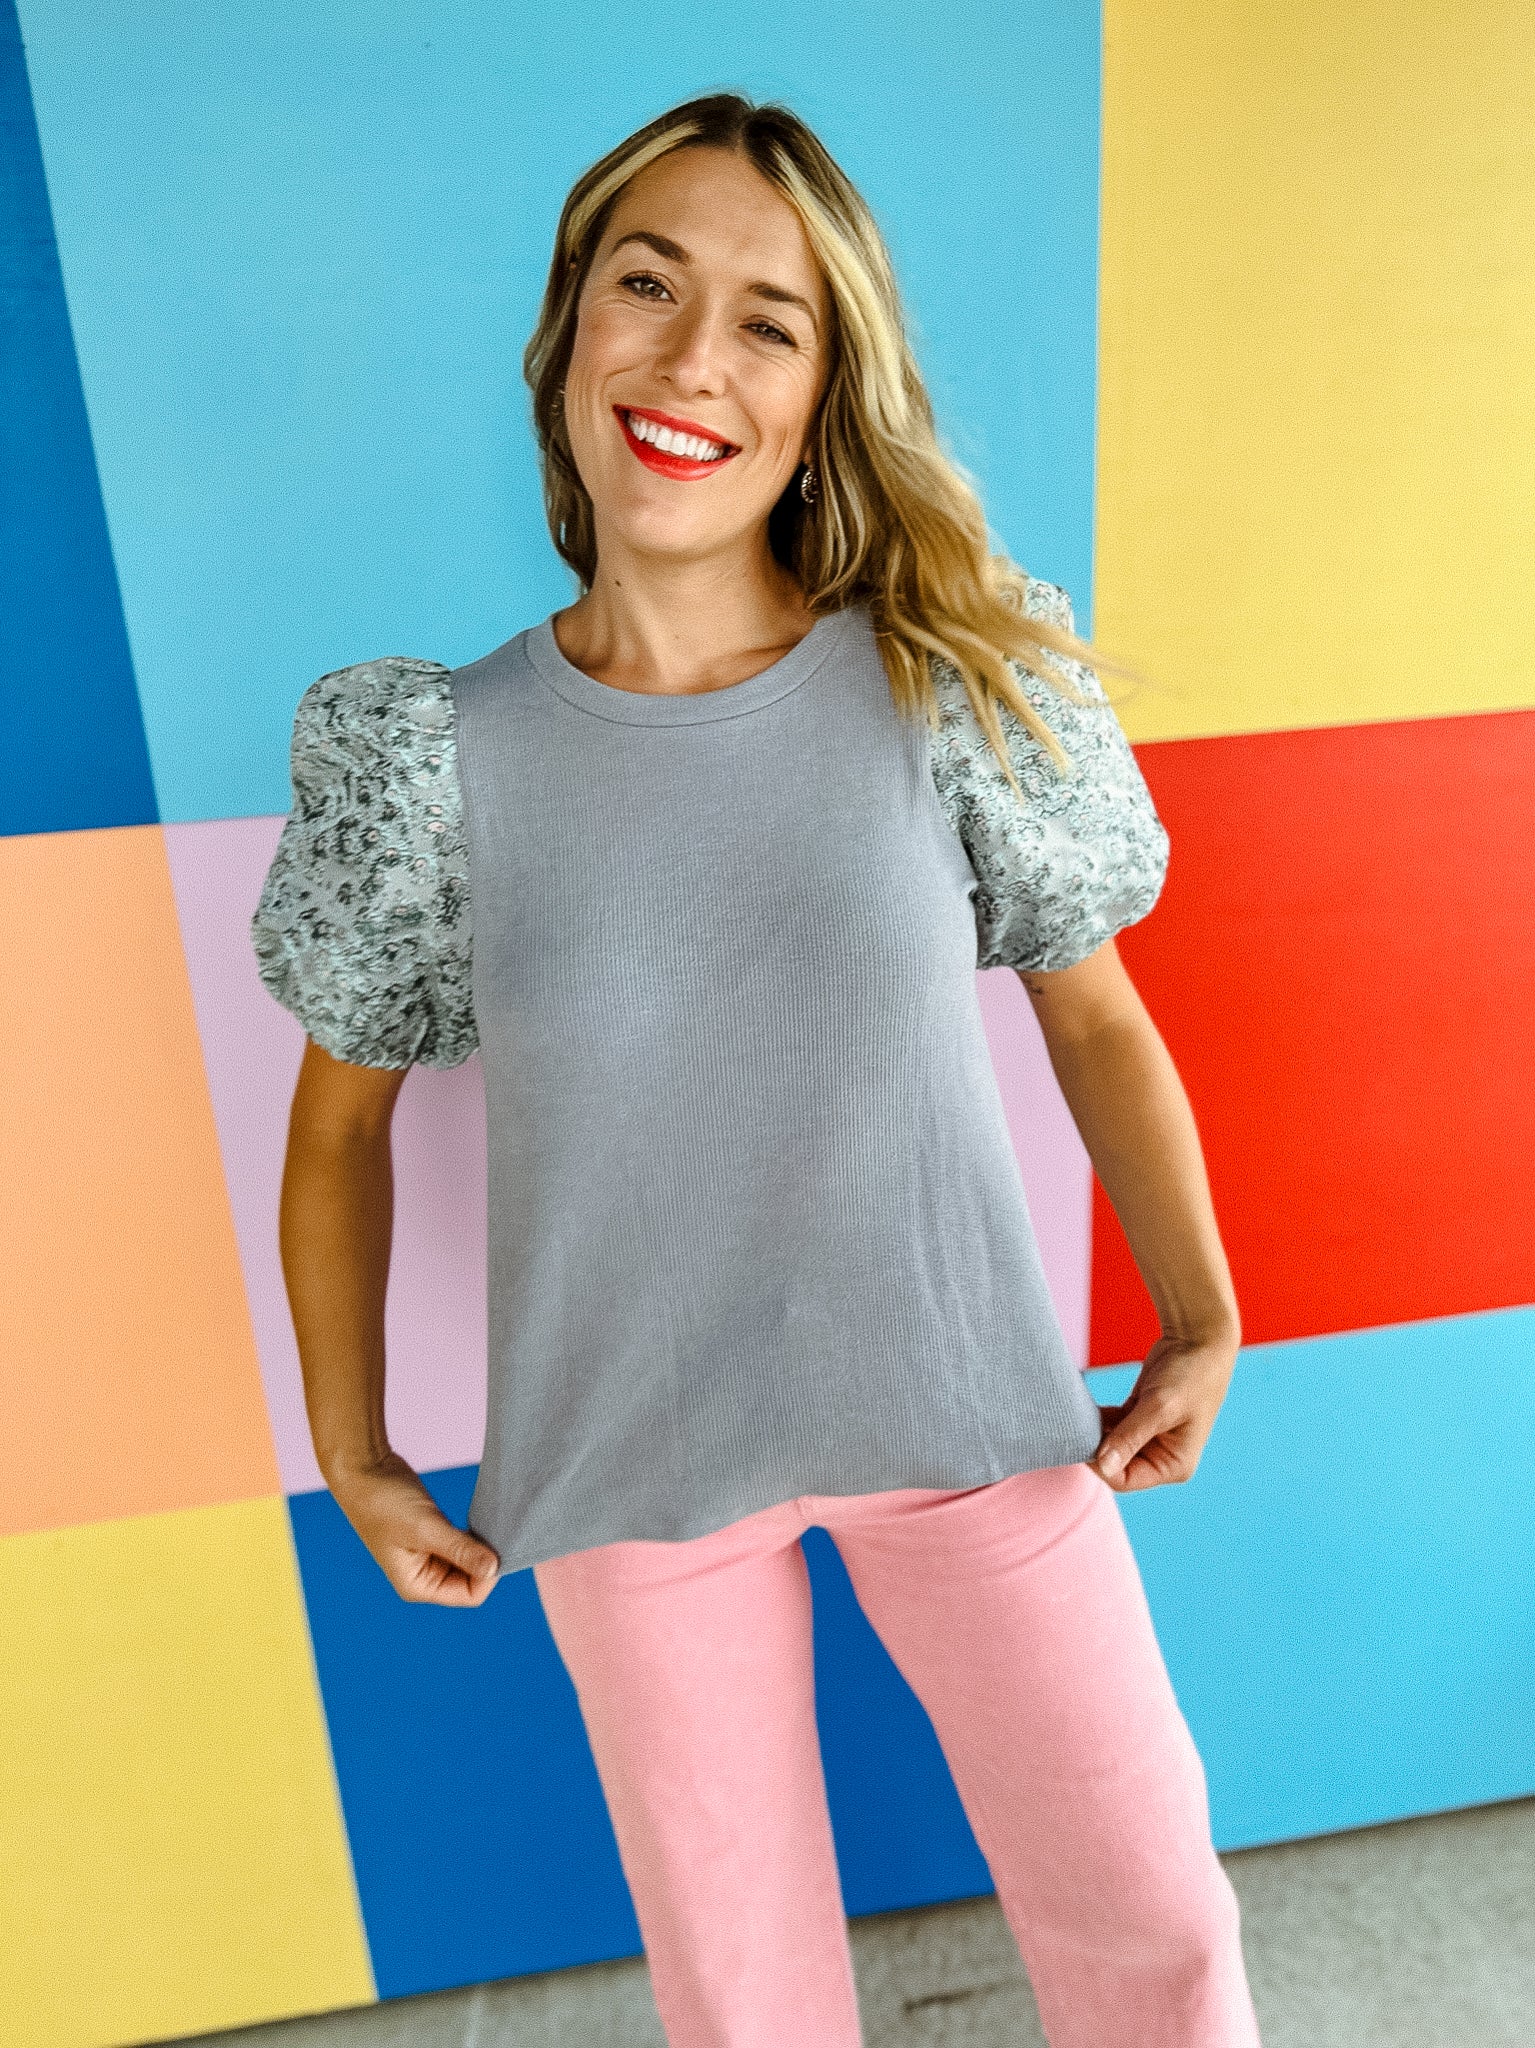 Evelyn Contrast Sleeve Top - Blue Grey + Dusty Pink + Duck Egg